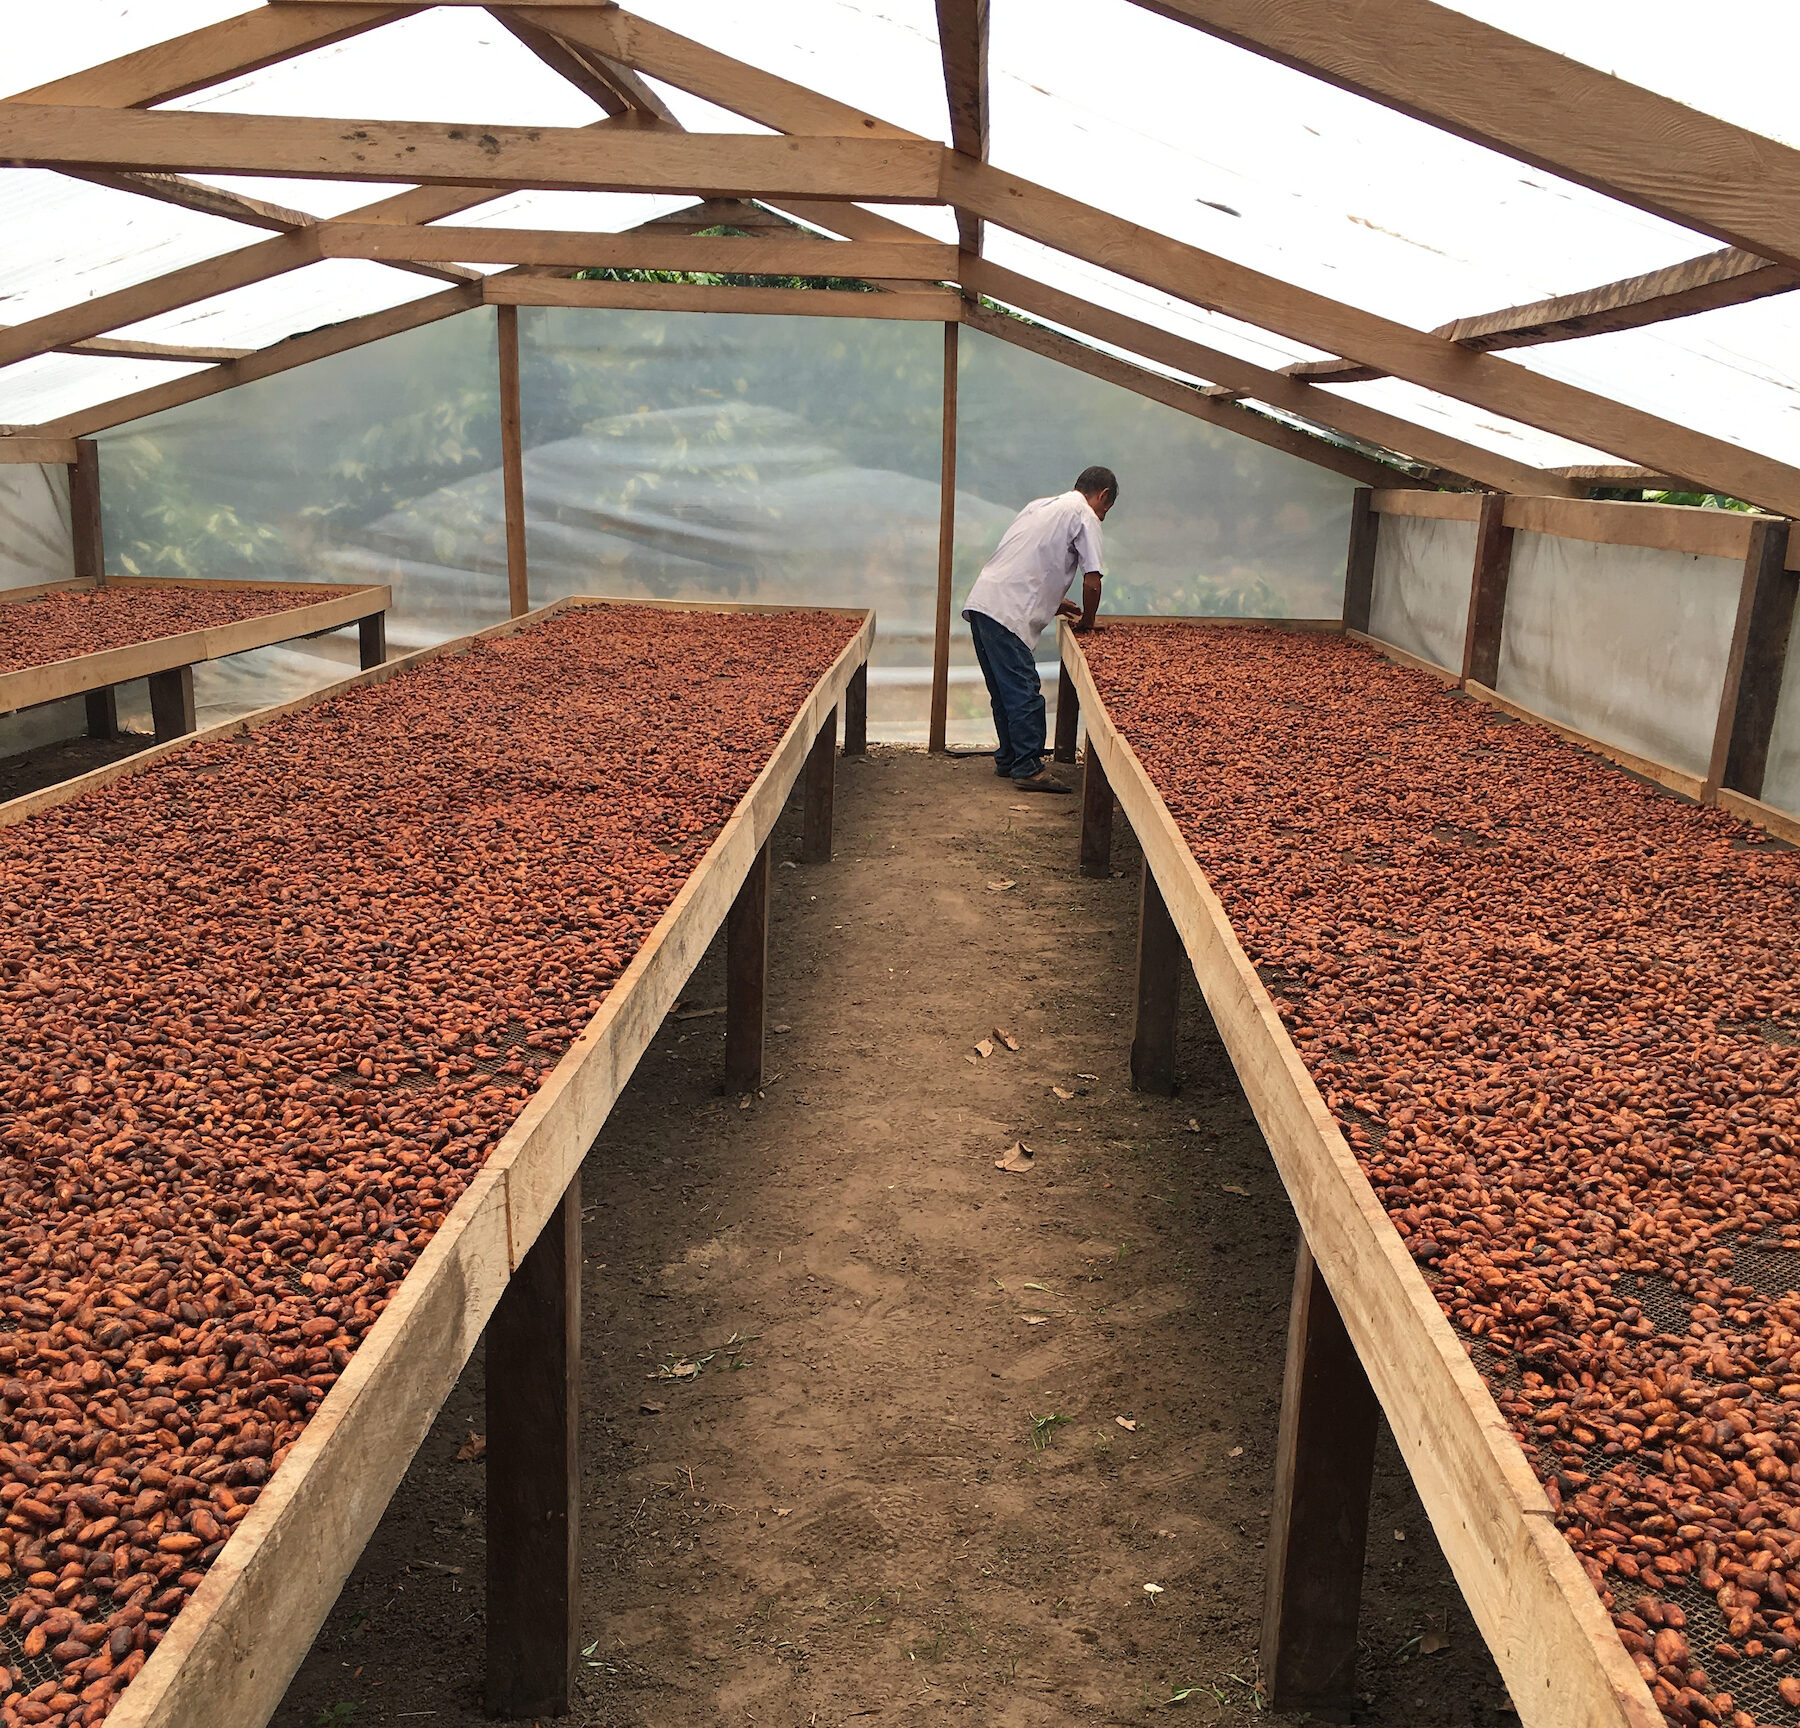 A COAS worker leans over the cacao drying beds in Pangoa, Peru. Credit: Root Capital.